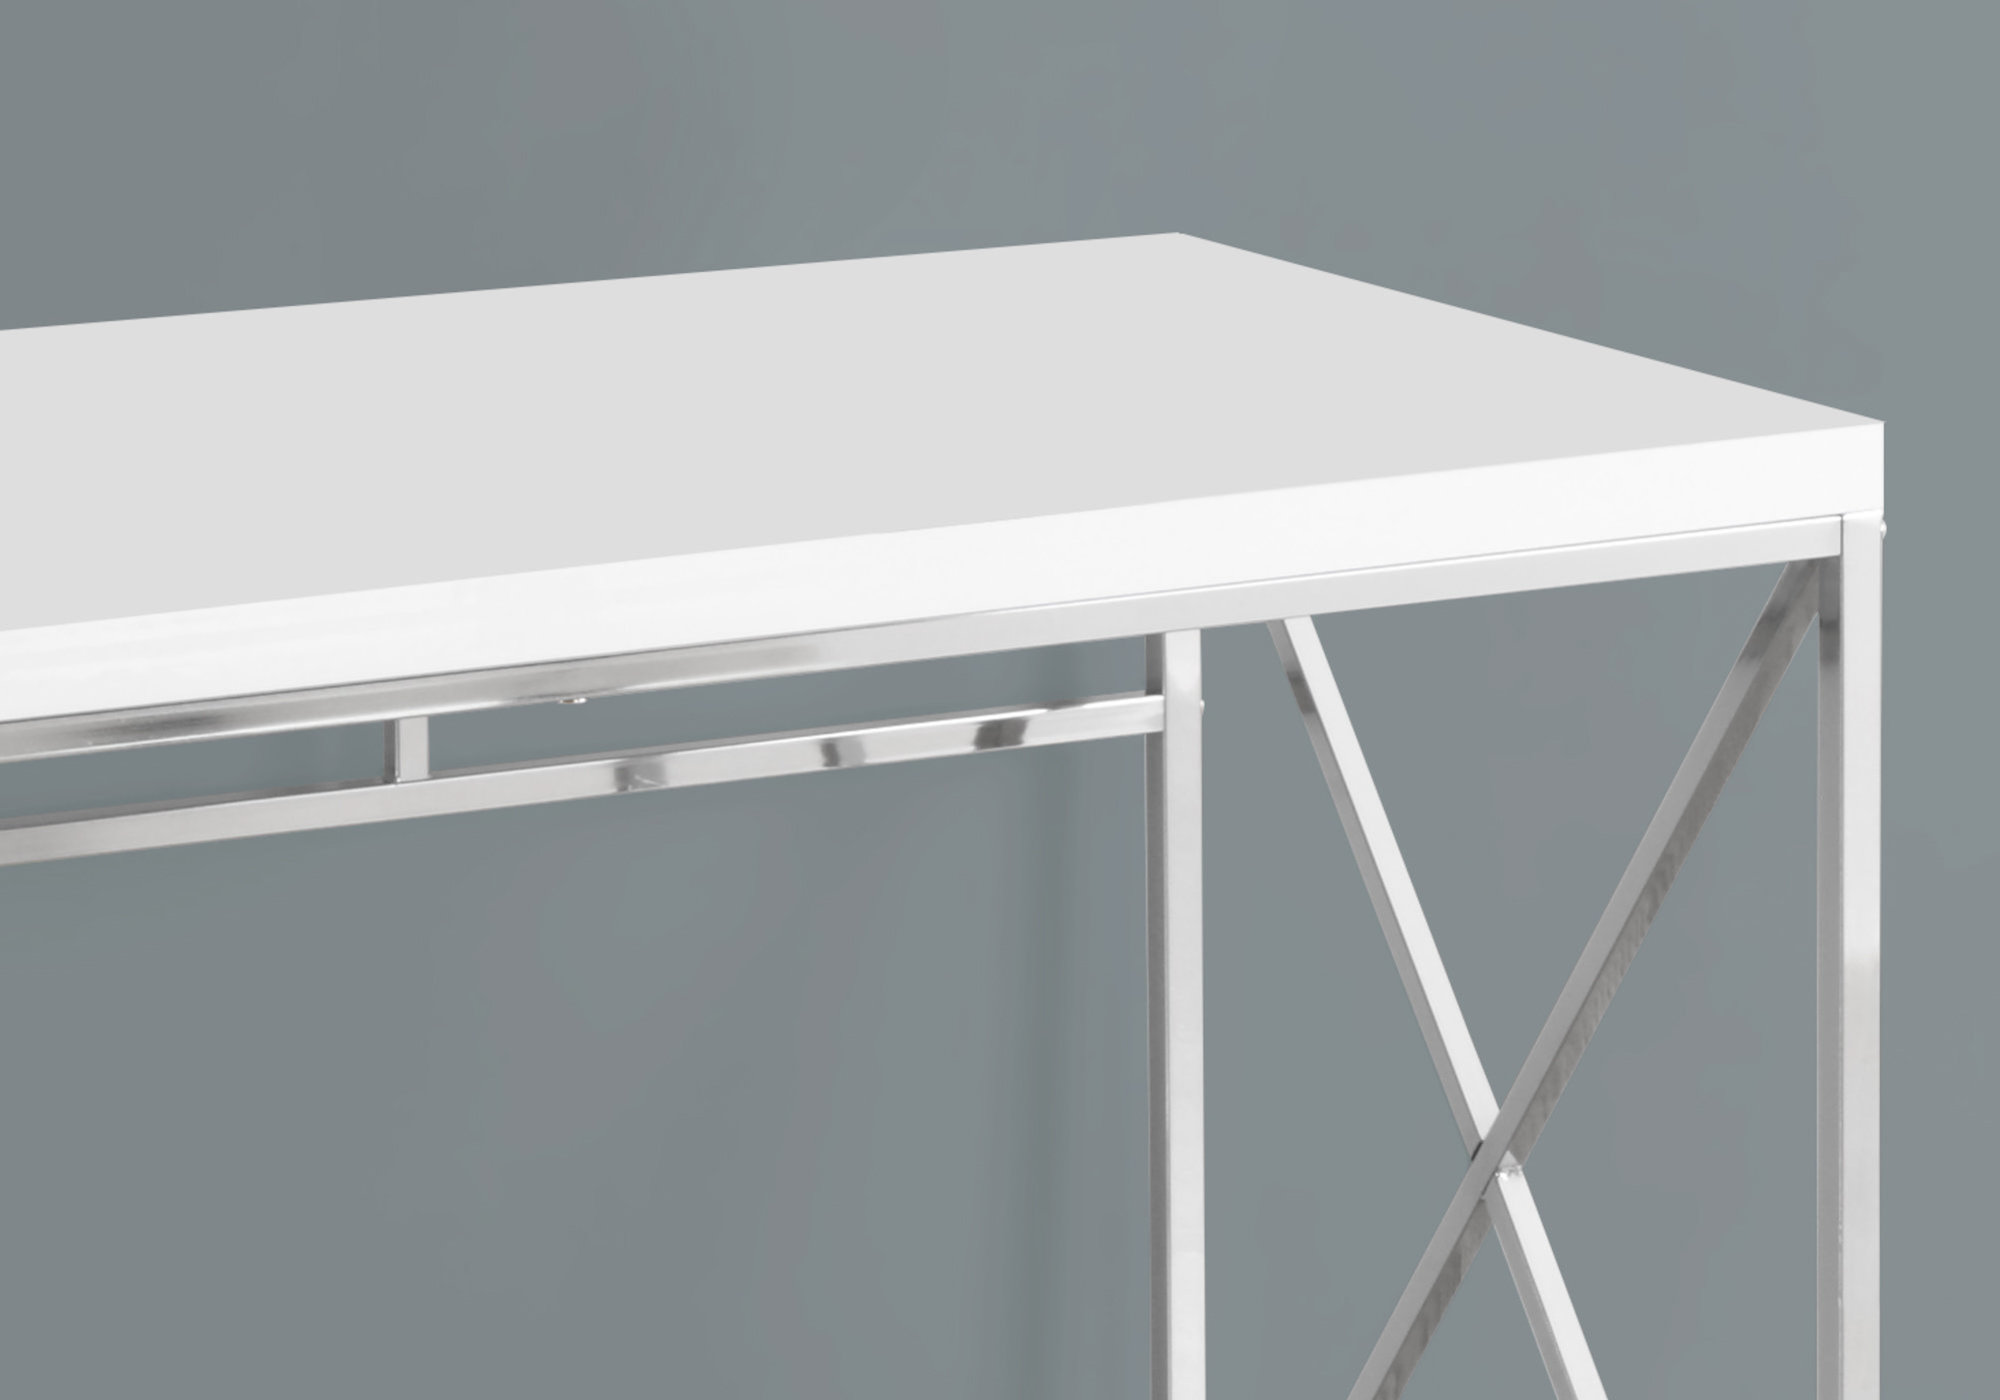 29.75" Glossy White Particle Board and Chrome Metal Computer Desk